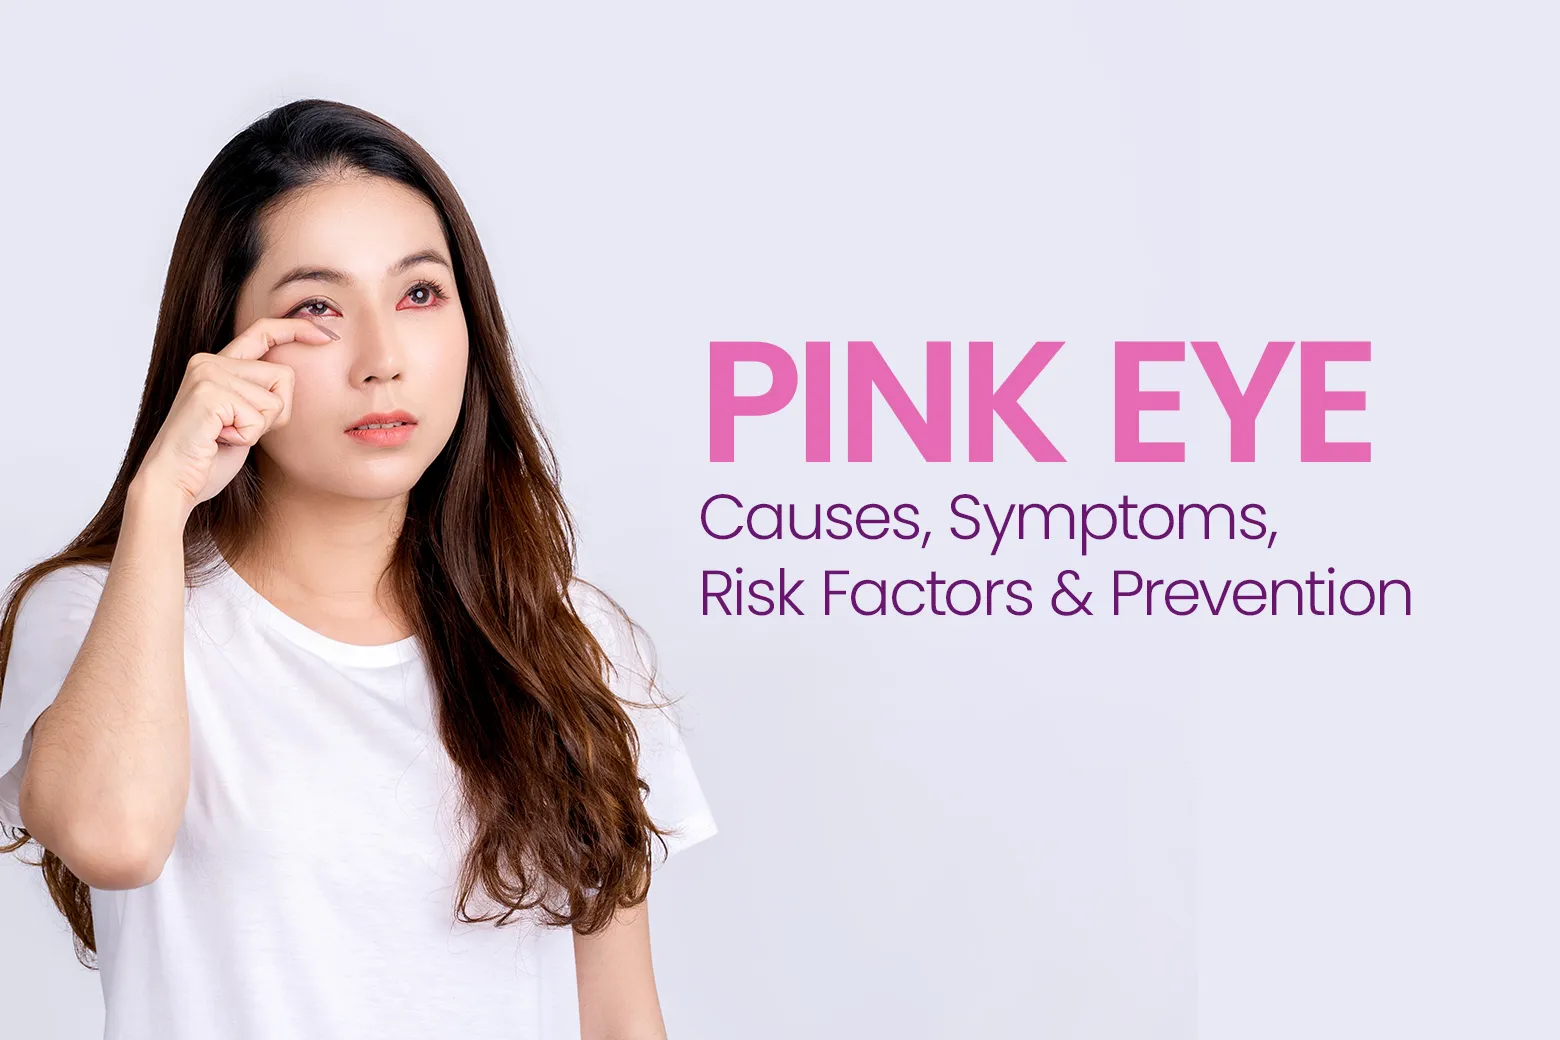 Pink Eye (conjunctivitis): Causes, Symptoms, Risk Factors and Prevention